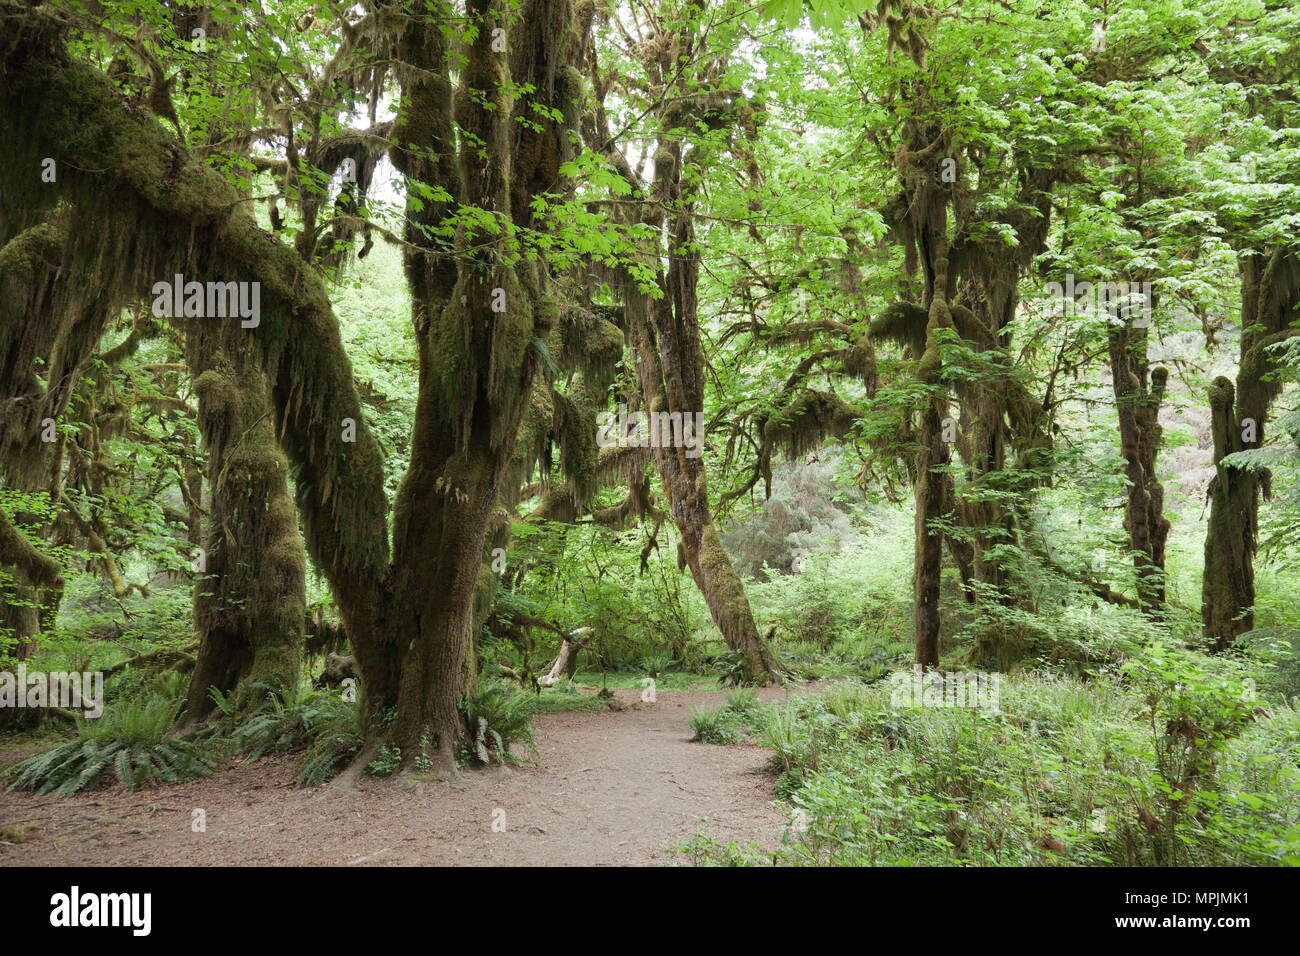 Trail through The Hoh Rainforest in Olympic National Park, Washington. Stock Photo